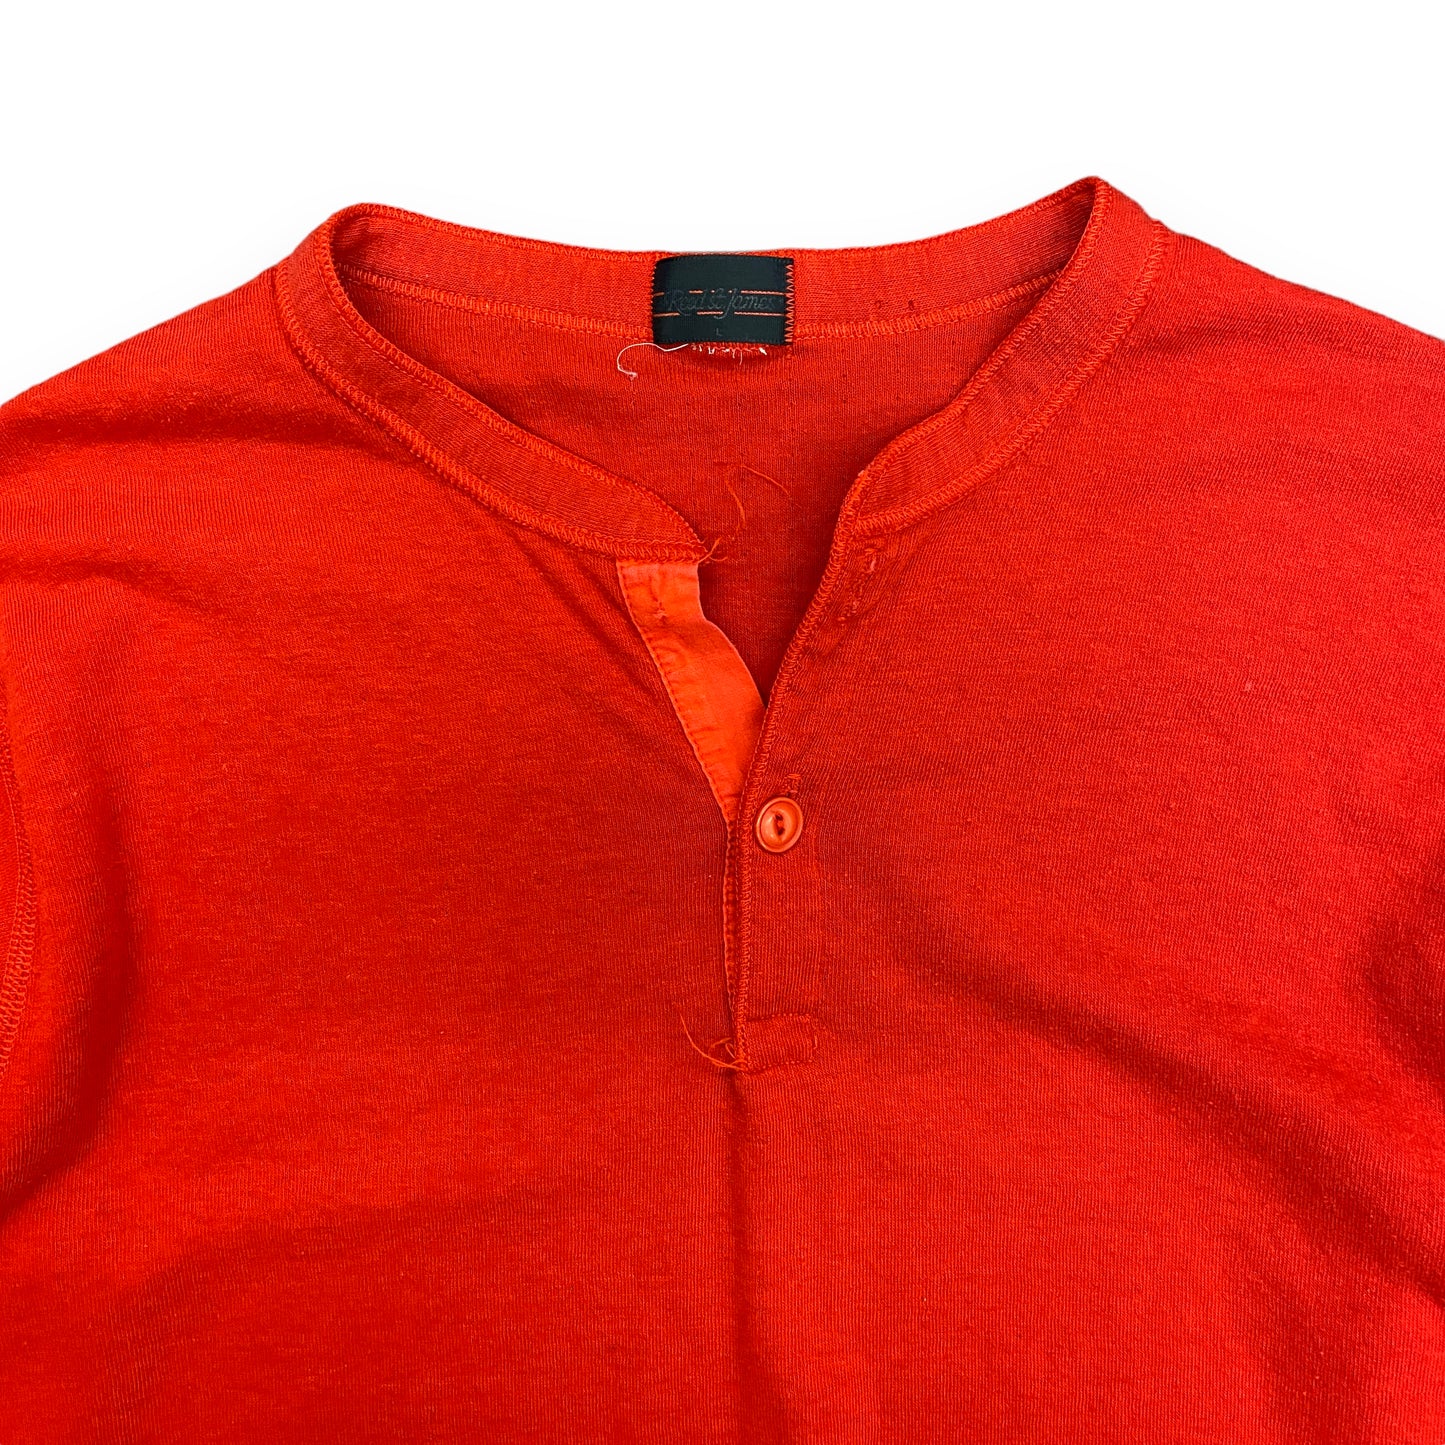 1980s Reed St. James Red Henley - Size Medium